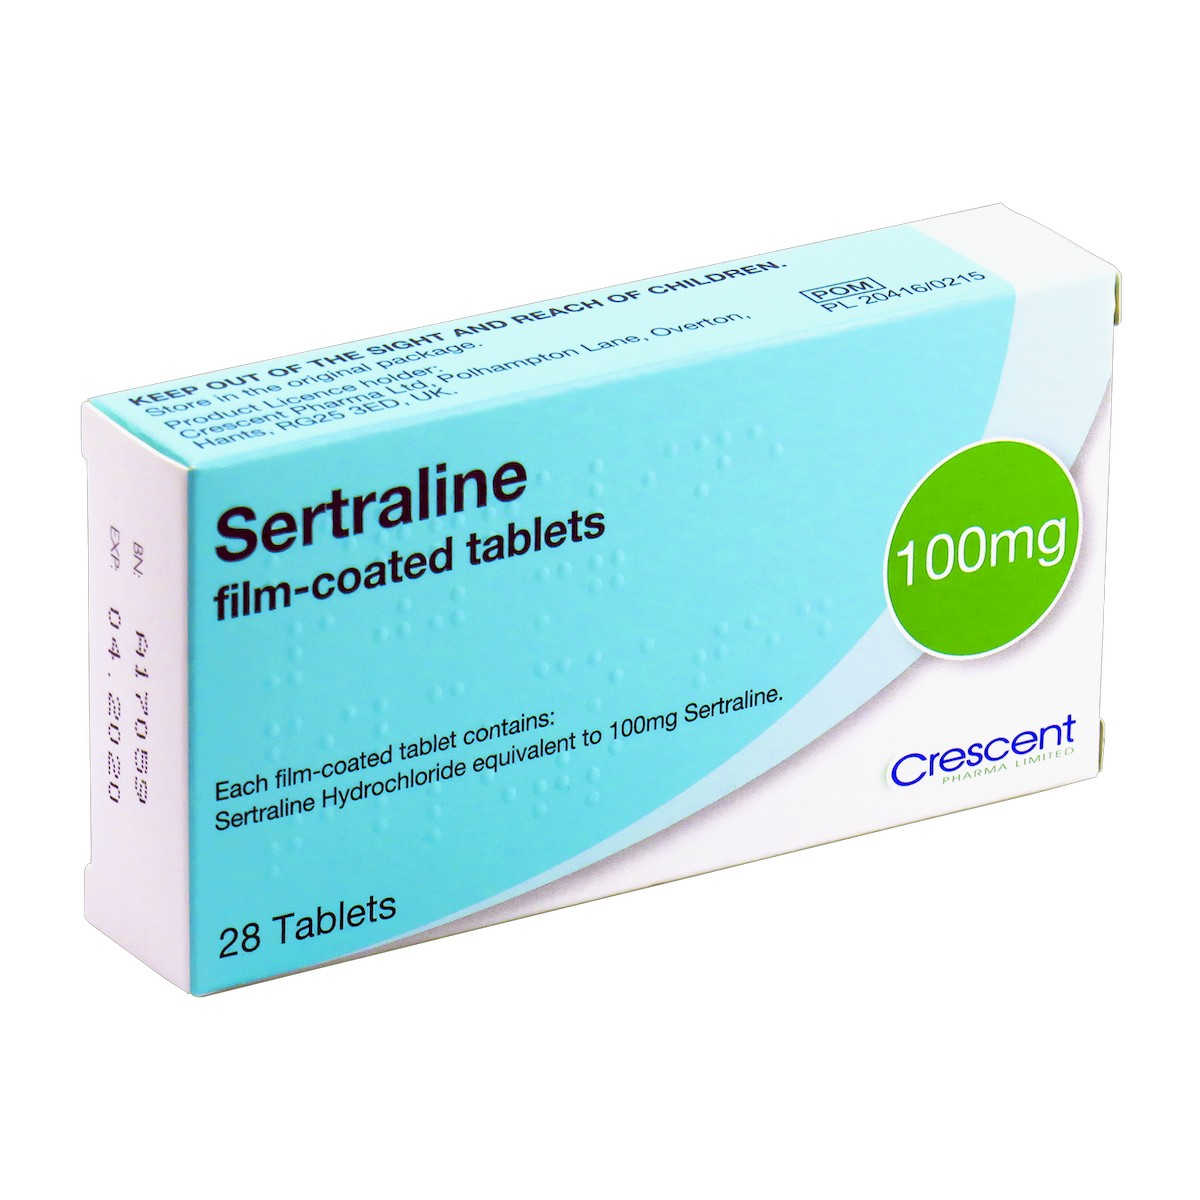 List 100+ Images pictures of sertraline 100 mg Stunning